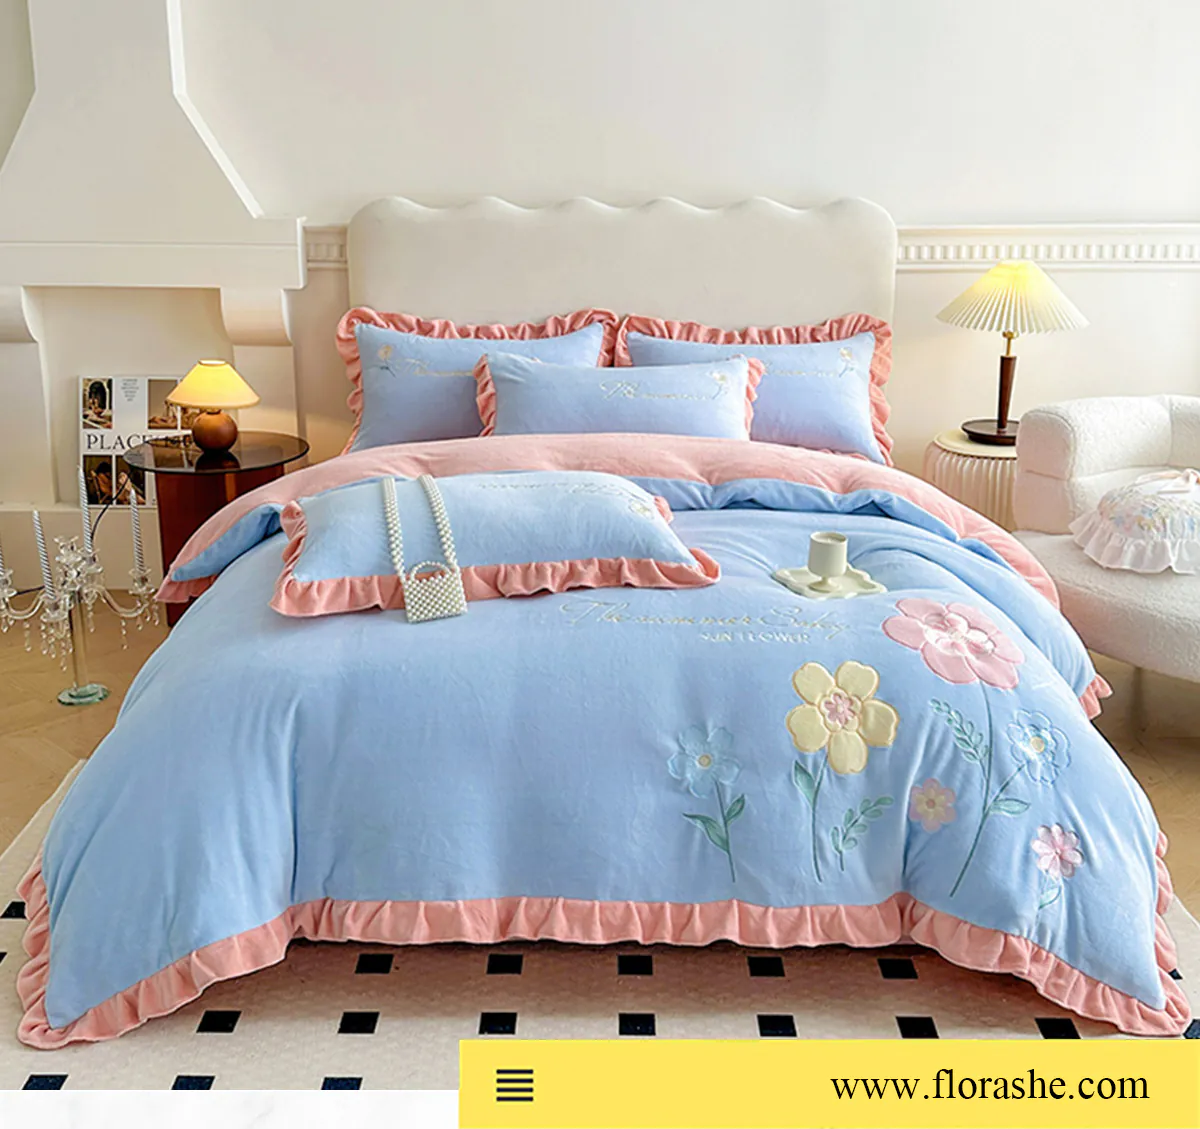 Comfy-Milk-Fiber-Embroidery-Quilt-Cover-Bed-Sheet-Pillowcases-Set15